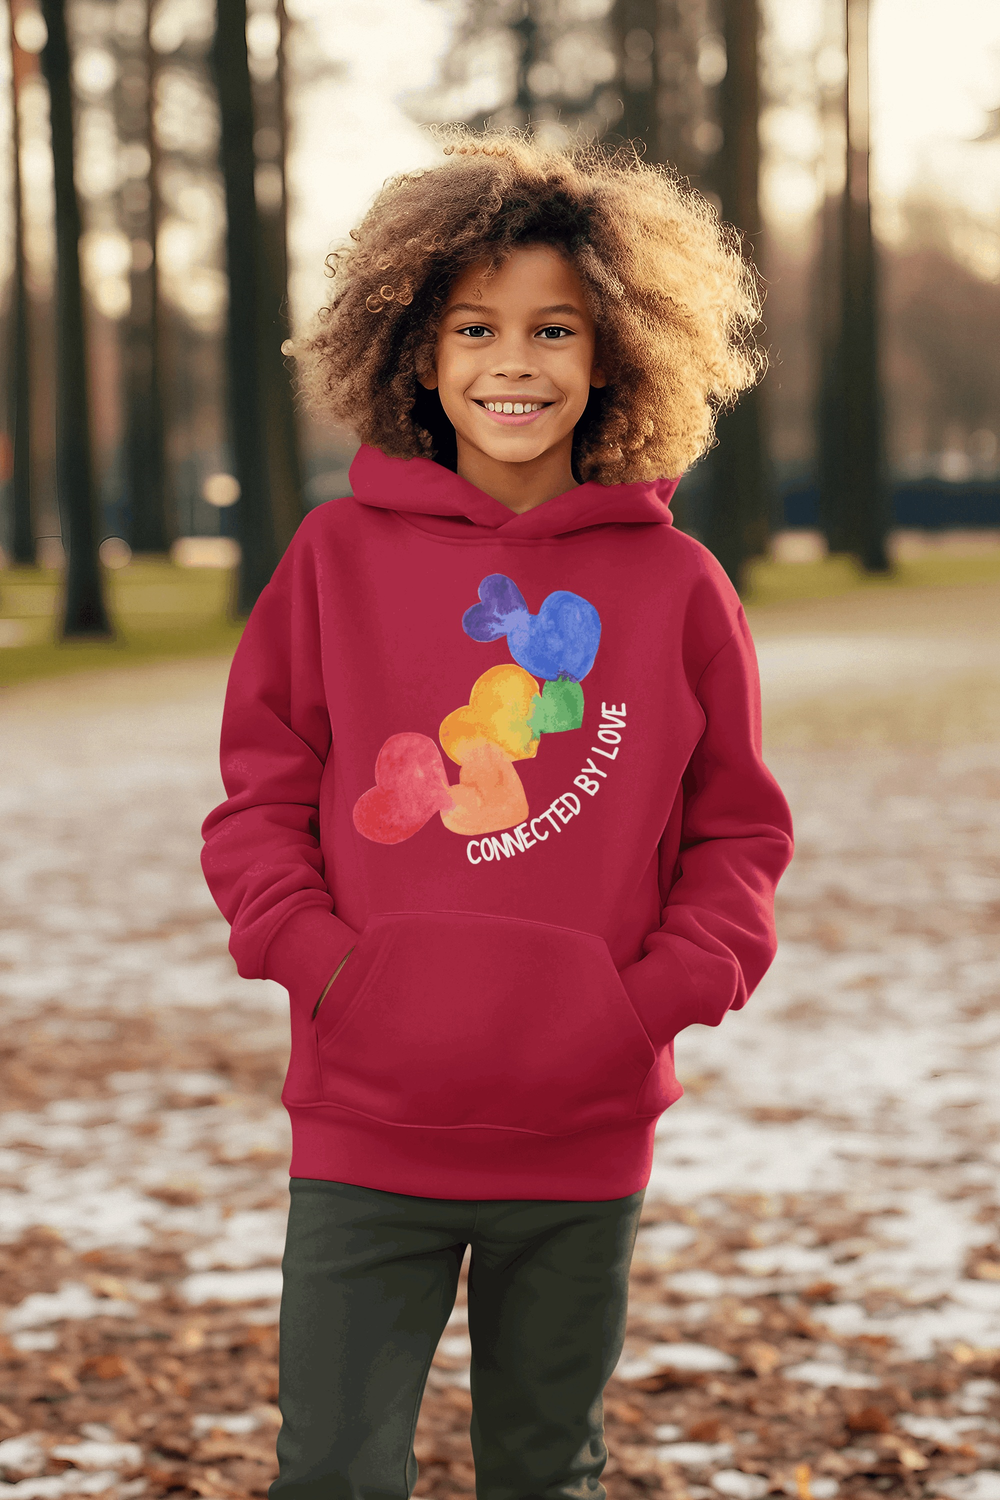 "Connected Hearts" Kids' Pullover Hoodie - Warmth in Unity